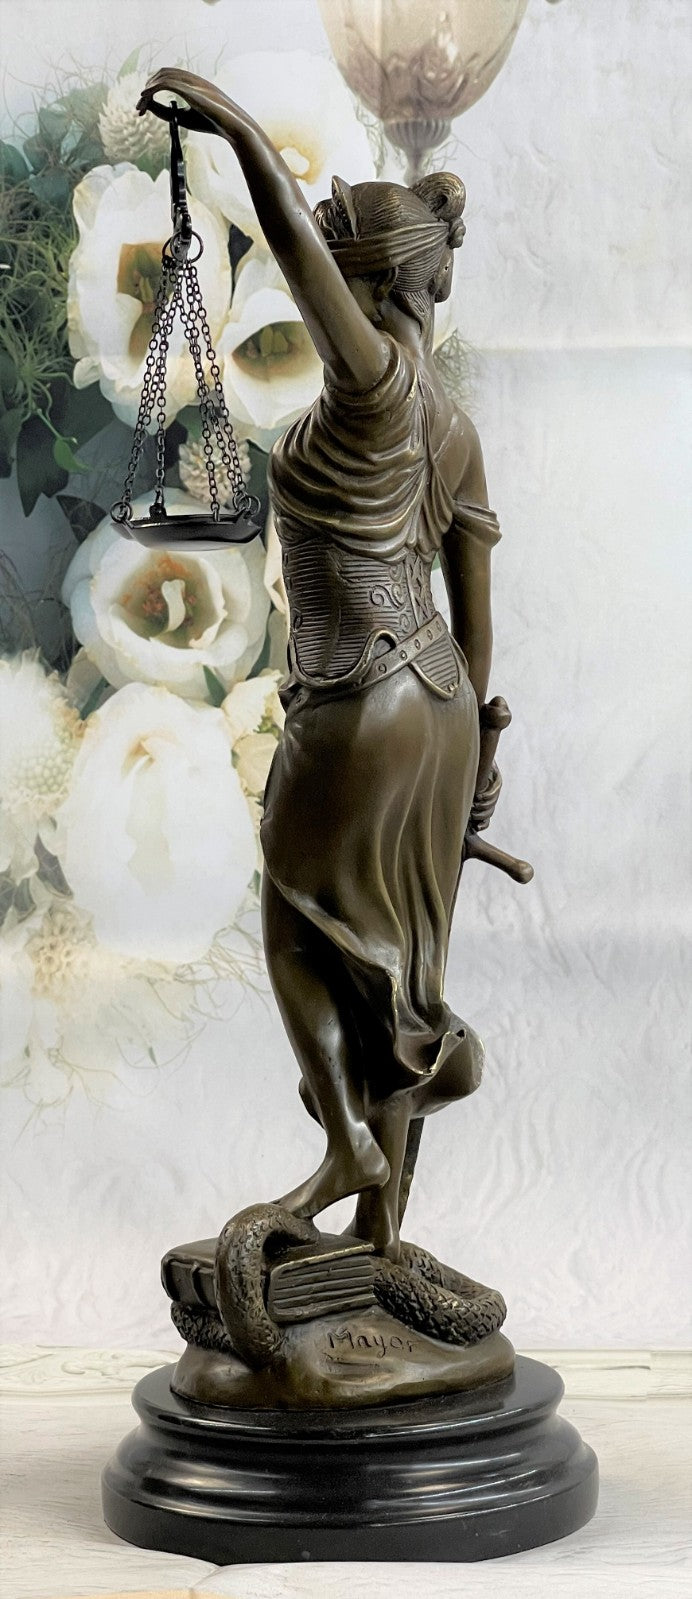 18" Tall BRONZE BLIND JUSTICE LAW MARBLE STATUE LADY SCALE Sculpture Nude